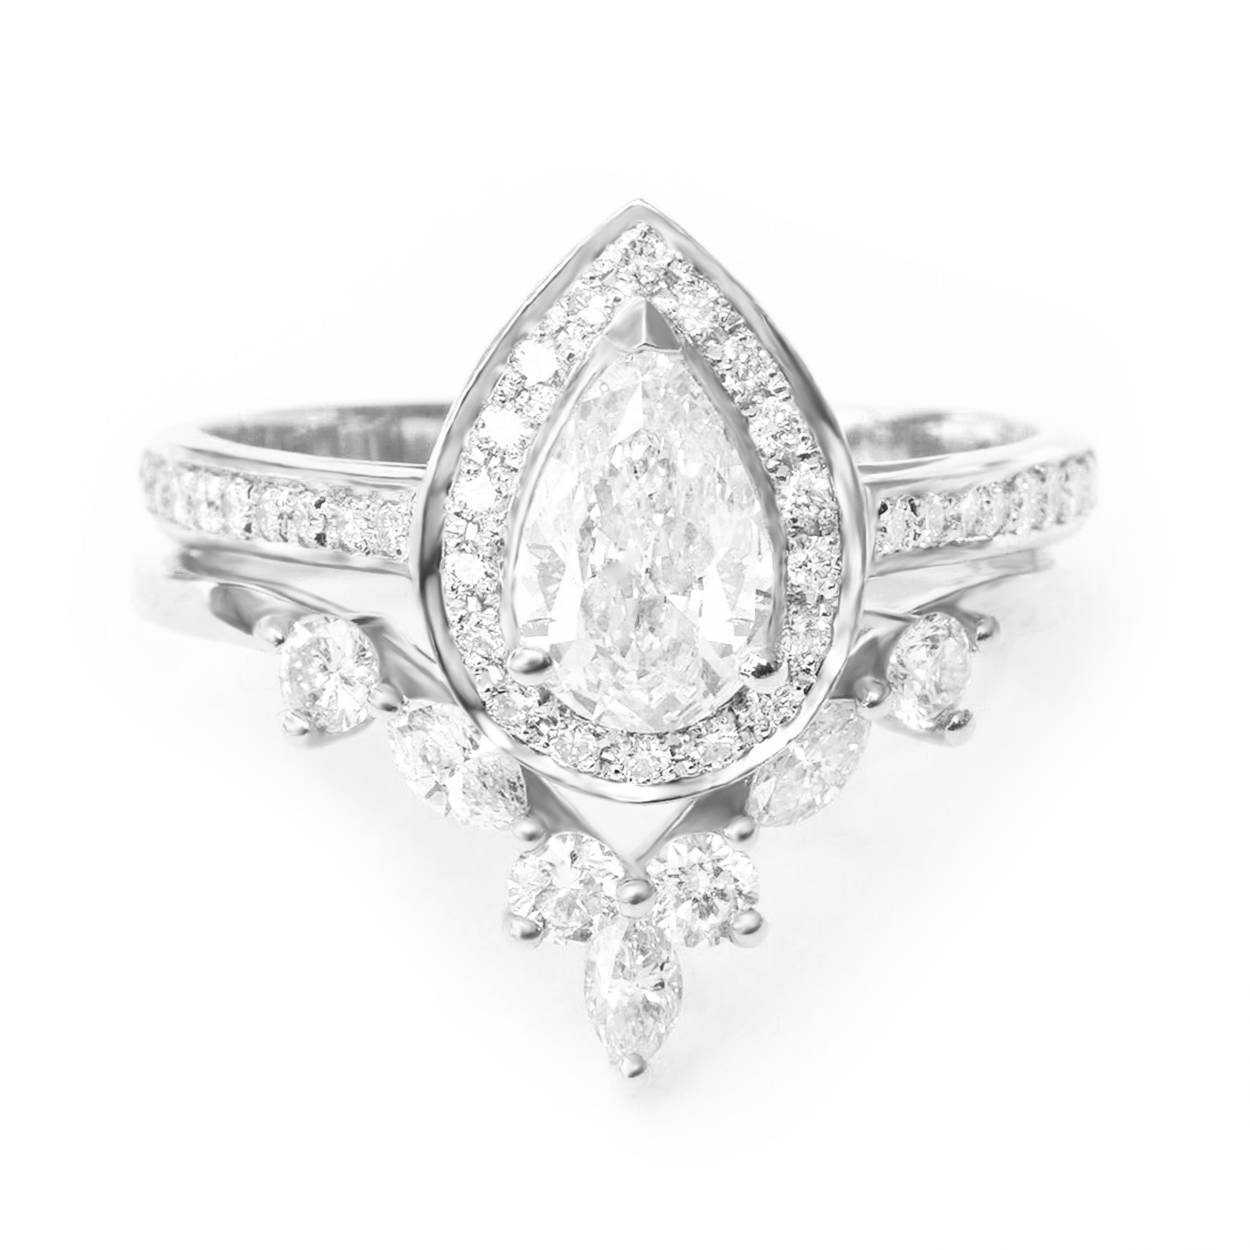 Pear Diamond Ring With One Matching Sideband, Wedding Two Rings Set  "Nia" & "Hermes"  ♥